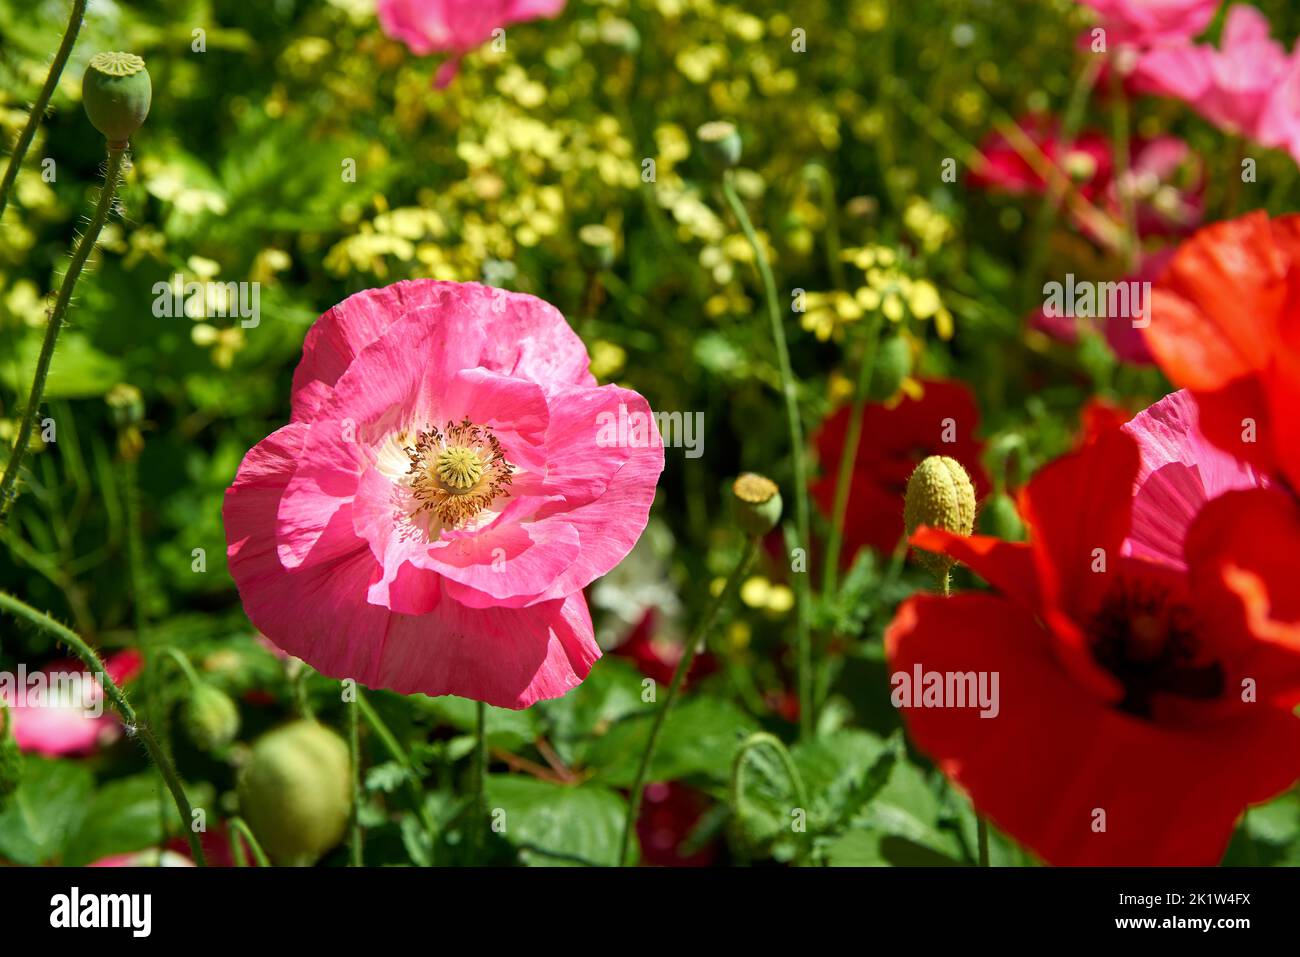 Pink Wild Poppy. Pink Poppy and other wild flowers in a rural setting. Stock Photo